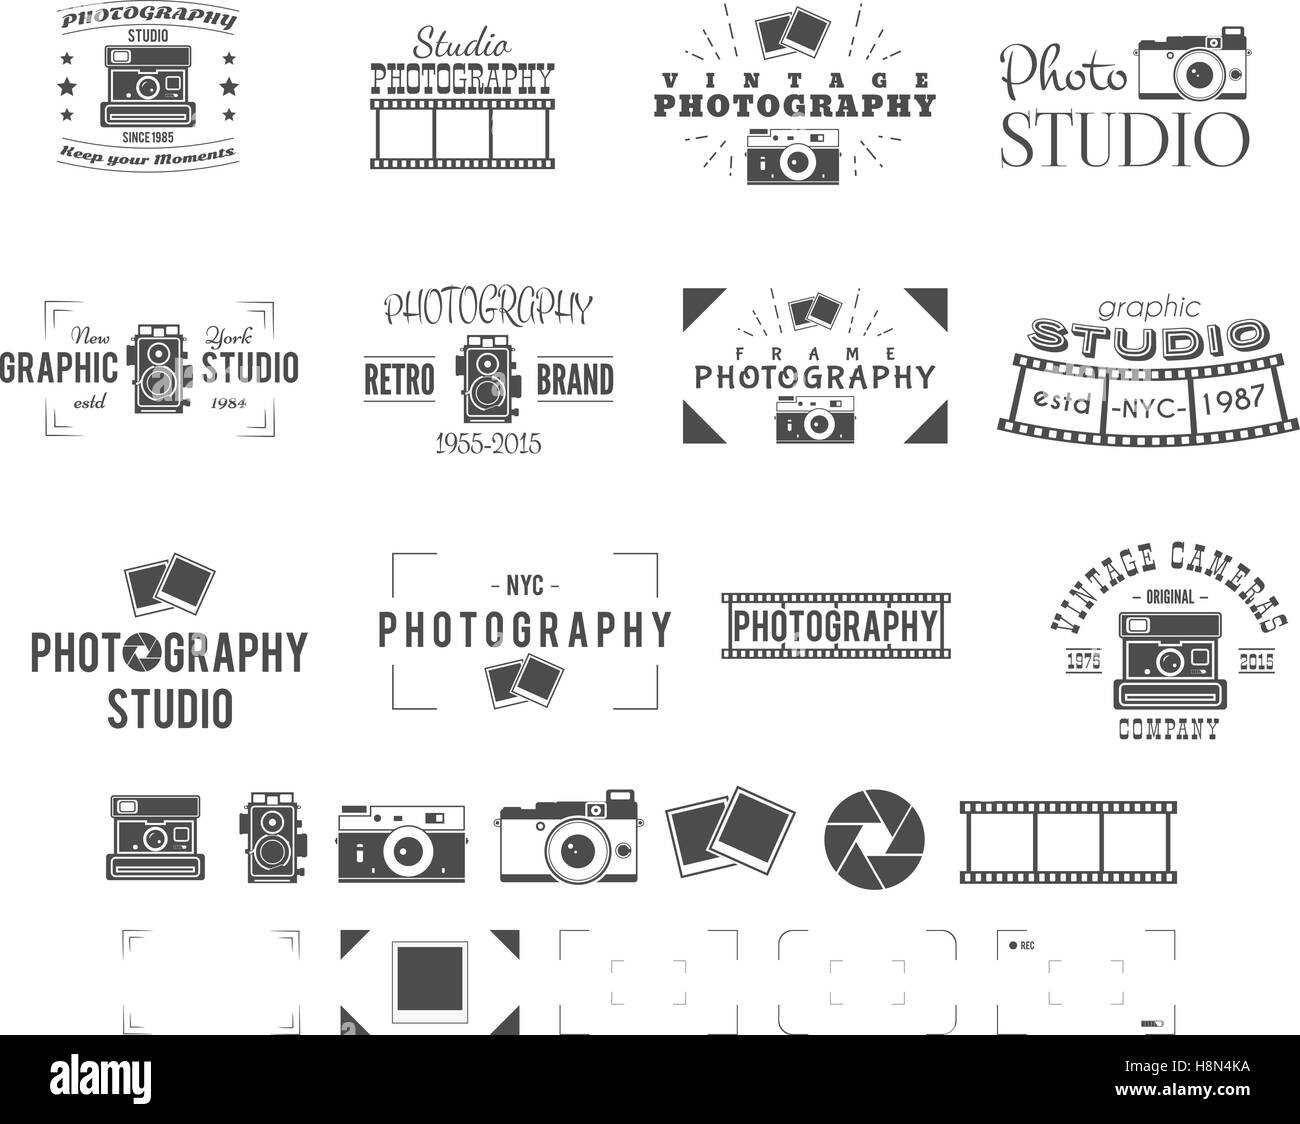 Photography logo templates set. Use for photo studio, old cameras equipment store, shop etc. Photographer symbols included - retro cameras, frame and other elements. Vector. Stock Vector